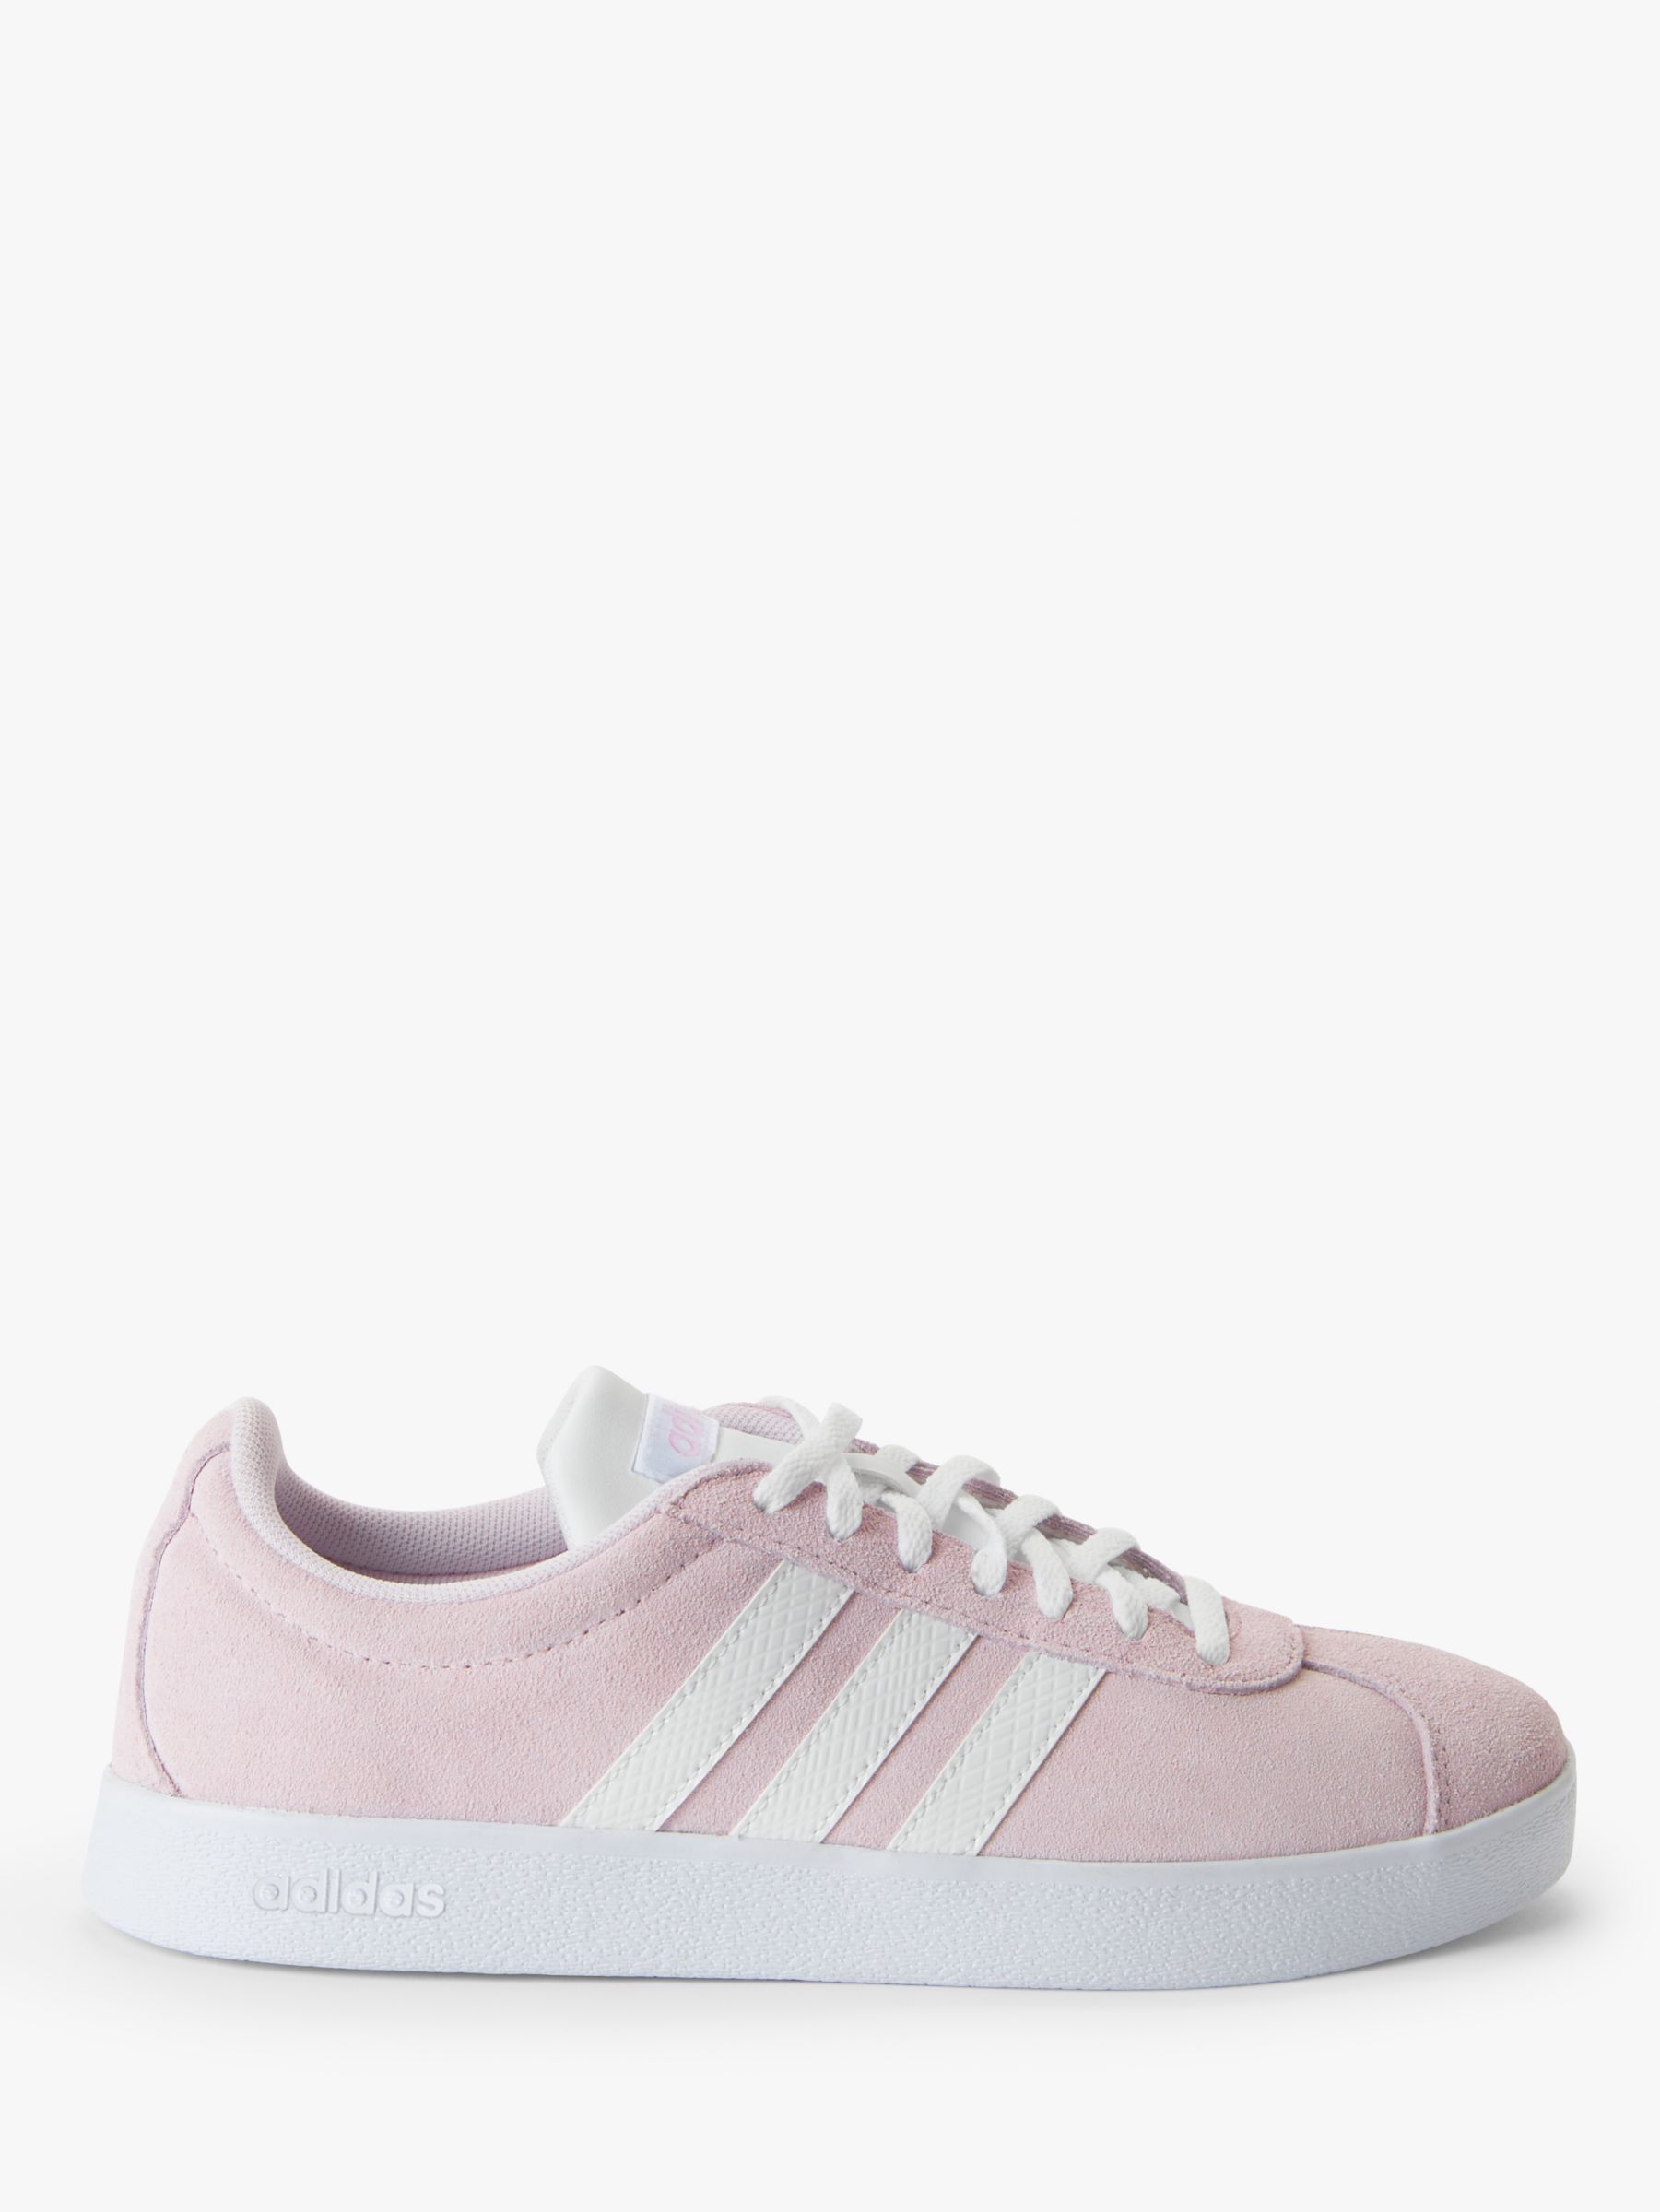 adidas suede womens trainers